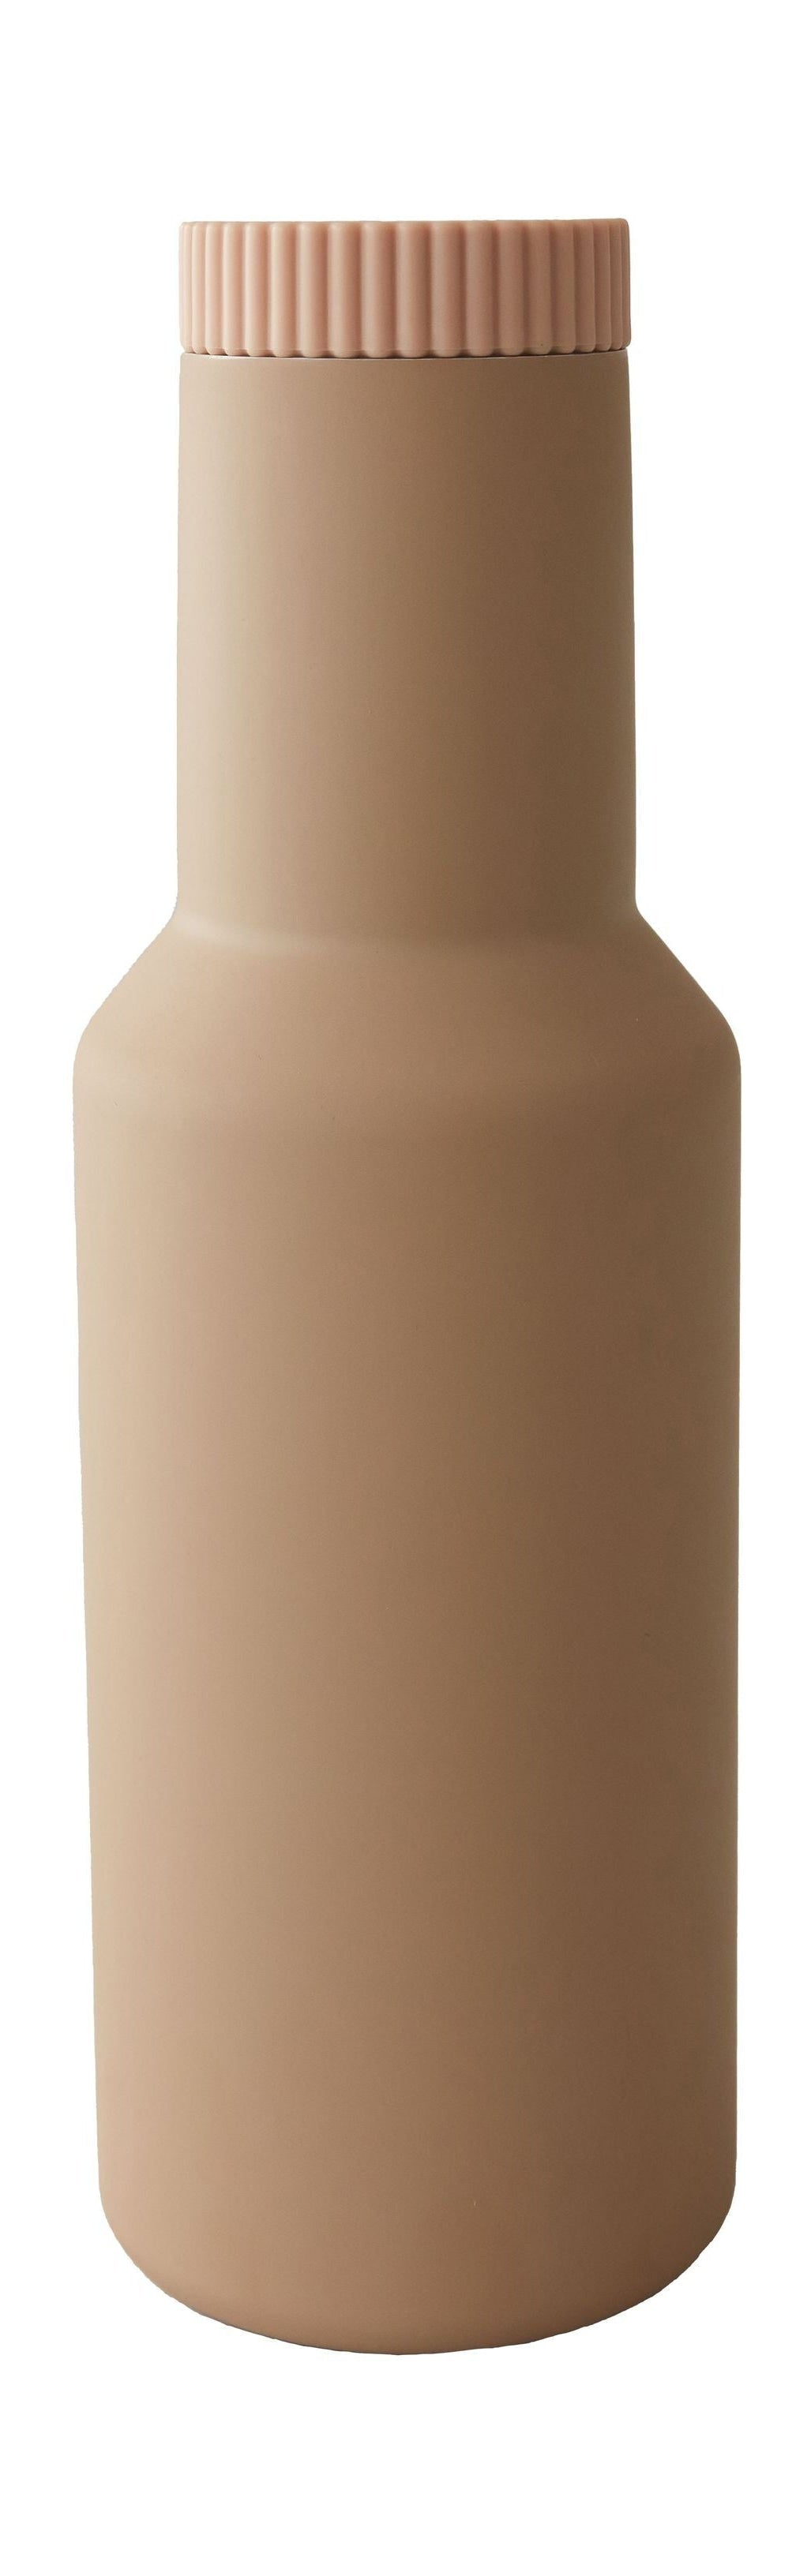 Design Letters Tube Thermo Carafe, Beige